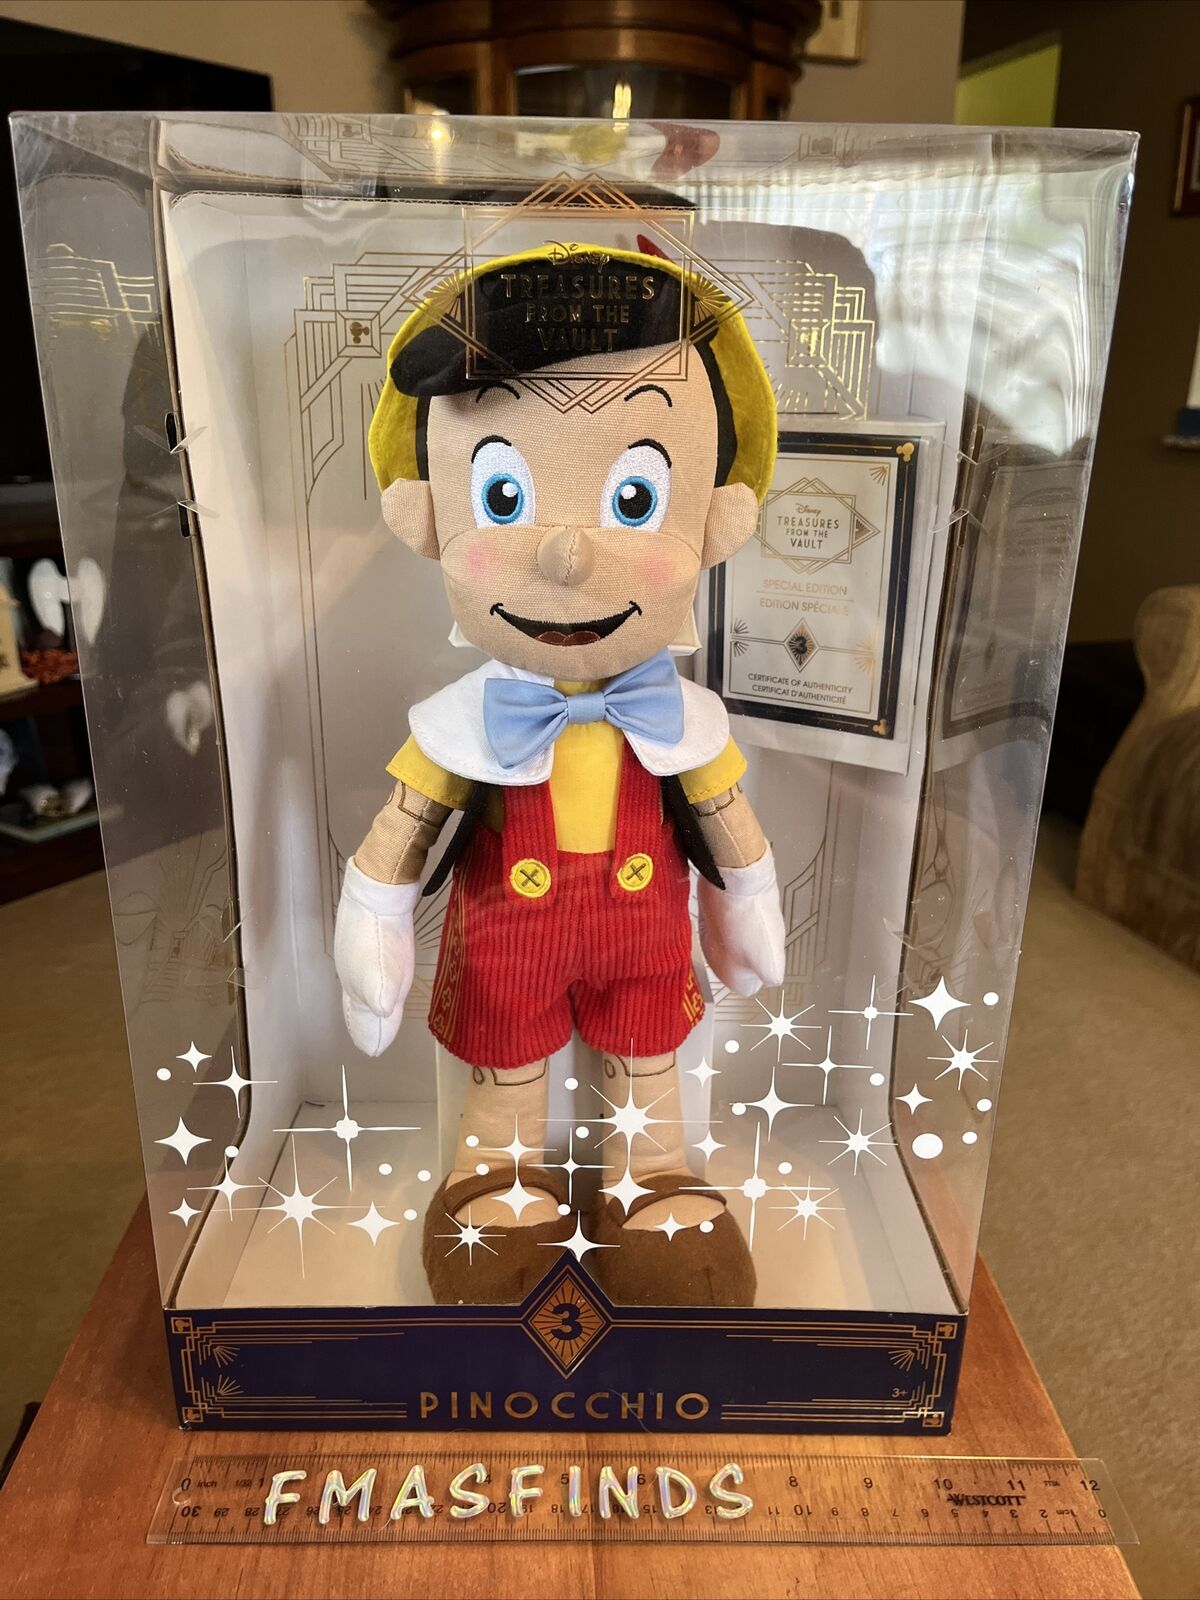 Disney Treasures from The Vault Limited Edition Pinocchio Amazon Exclusive